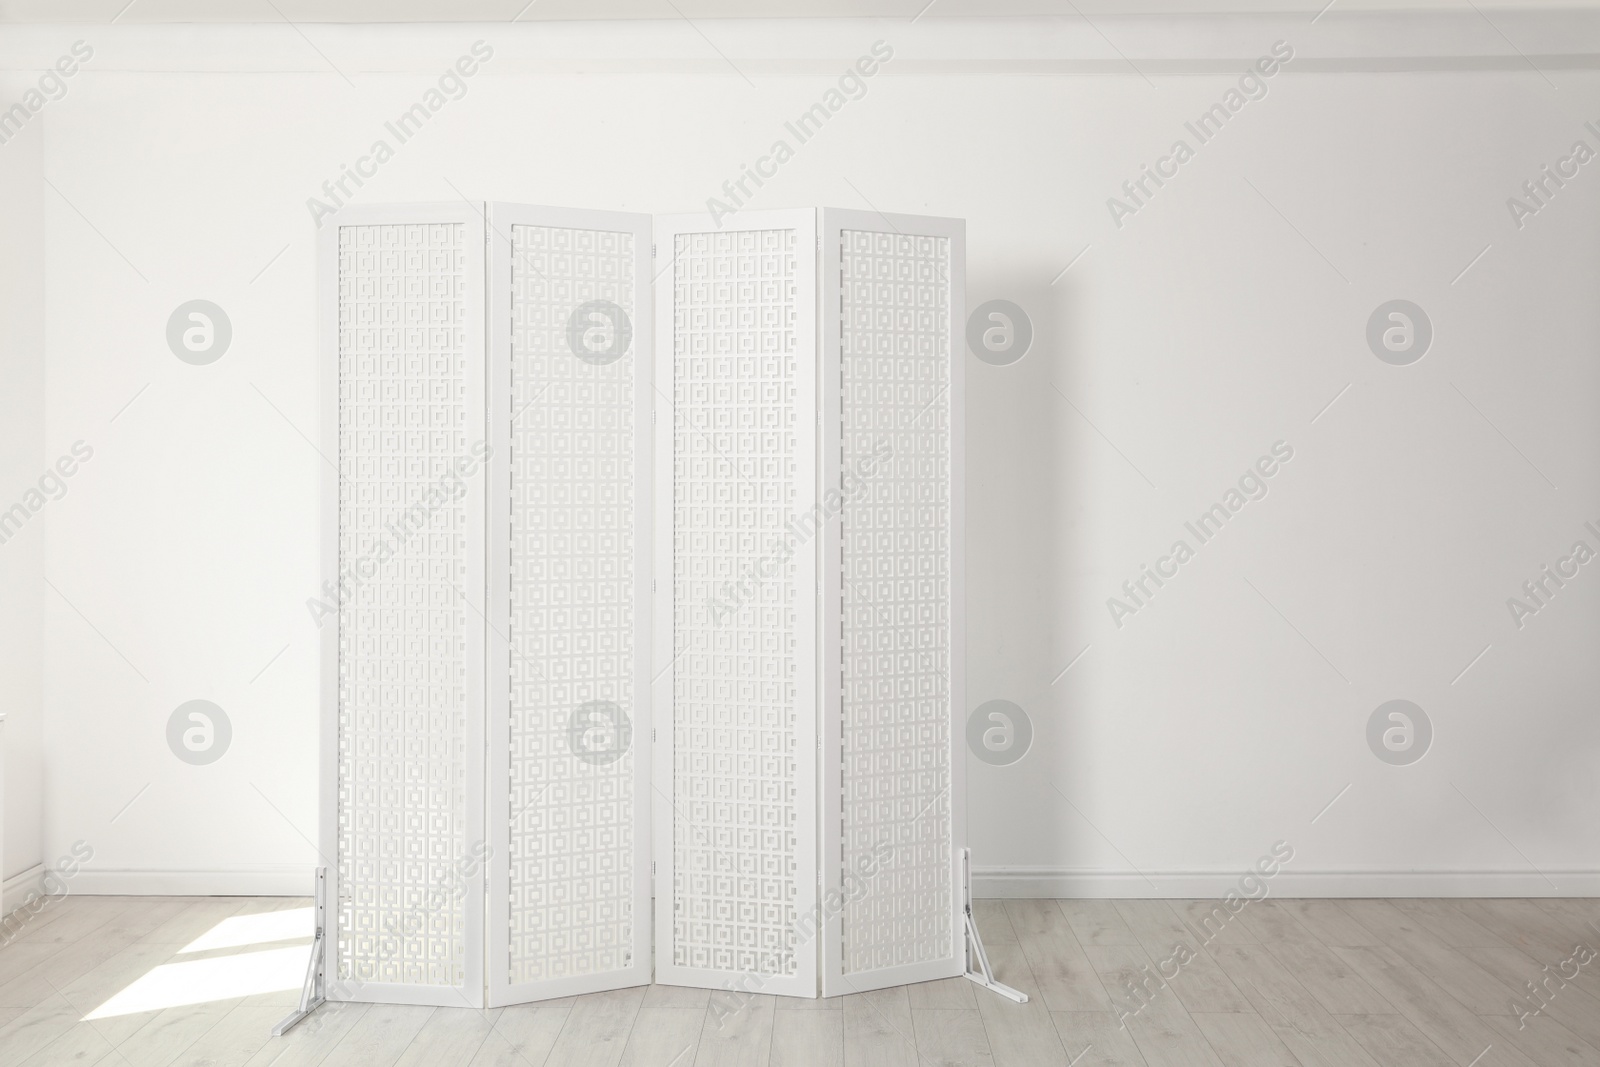 Photo of Modern folding screen in light spacious room